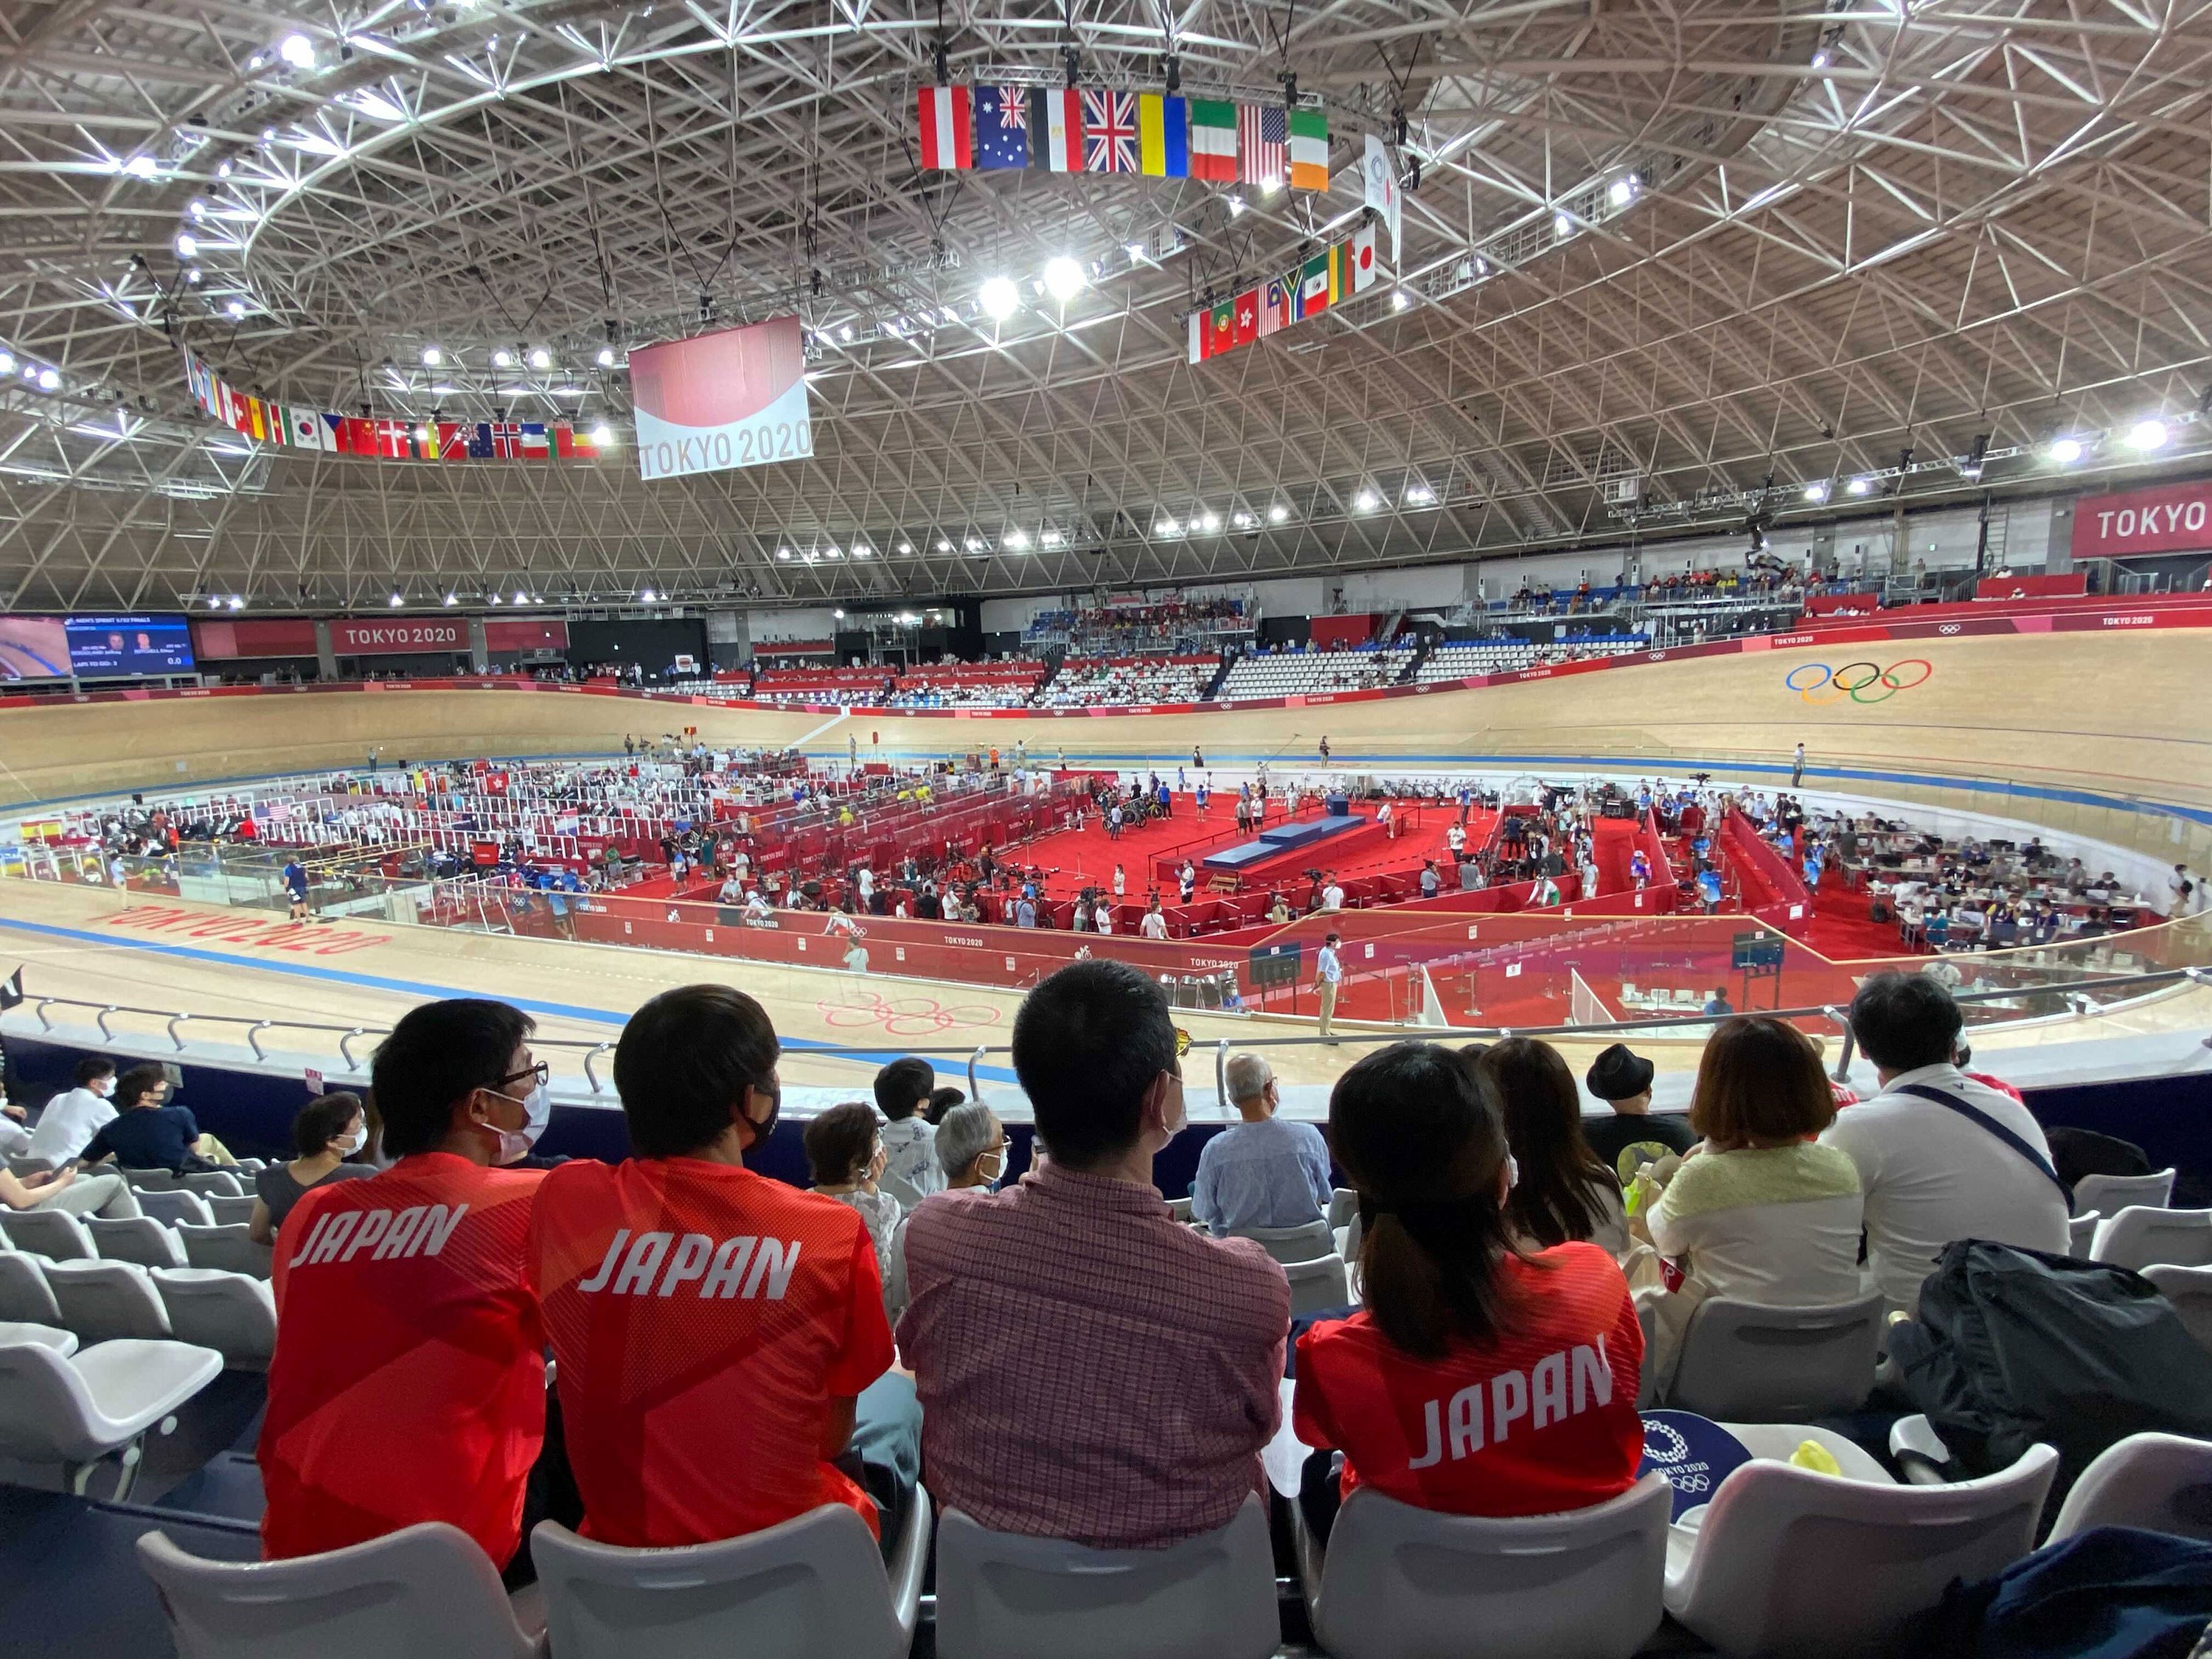 Fans are allowed to take up 50% of the 3,600-seat Izu Velodrome's capacity.